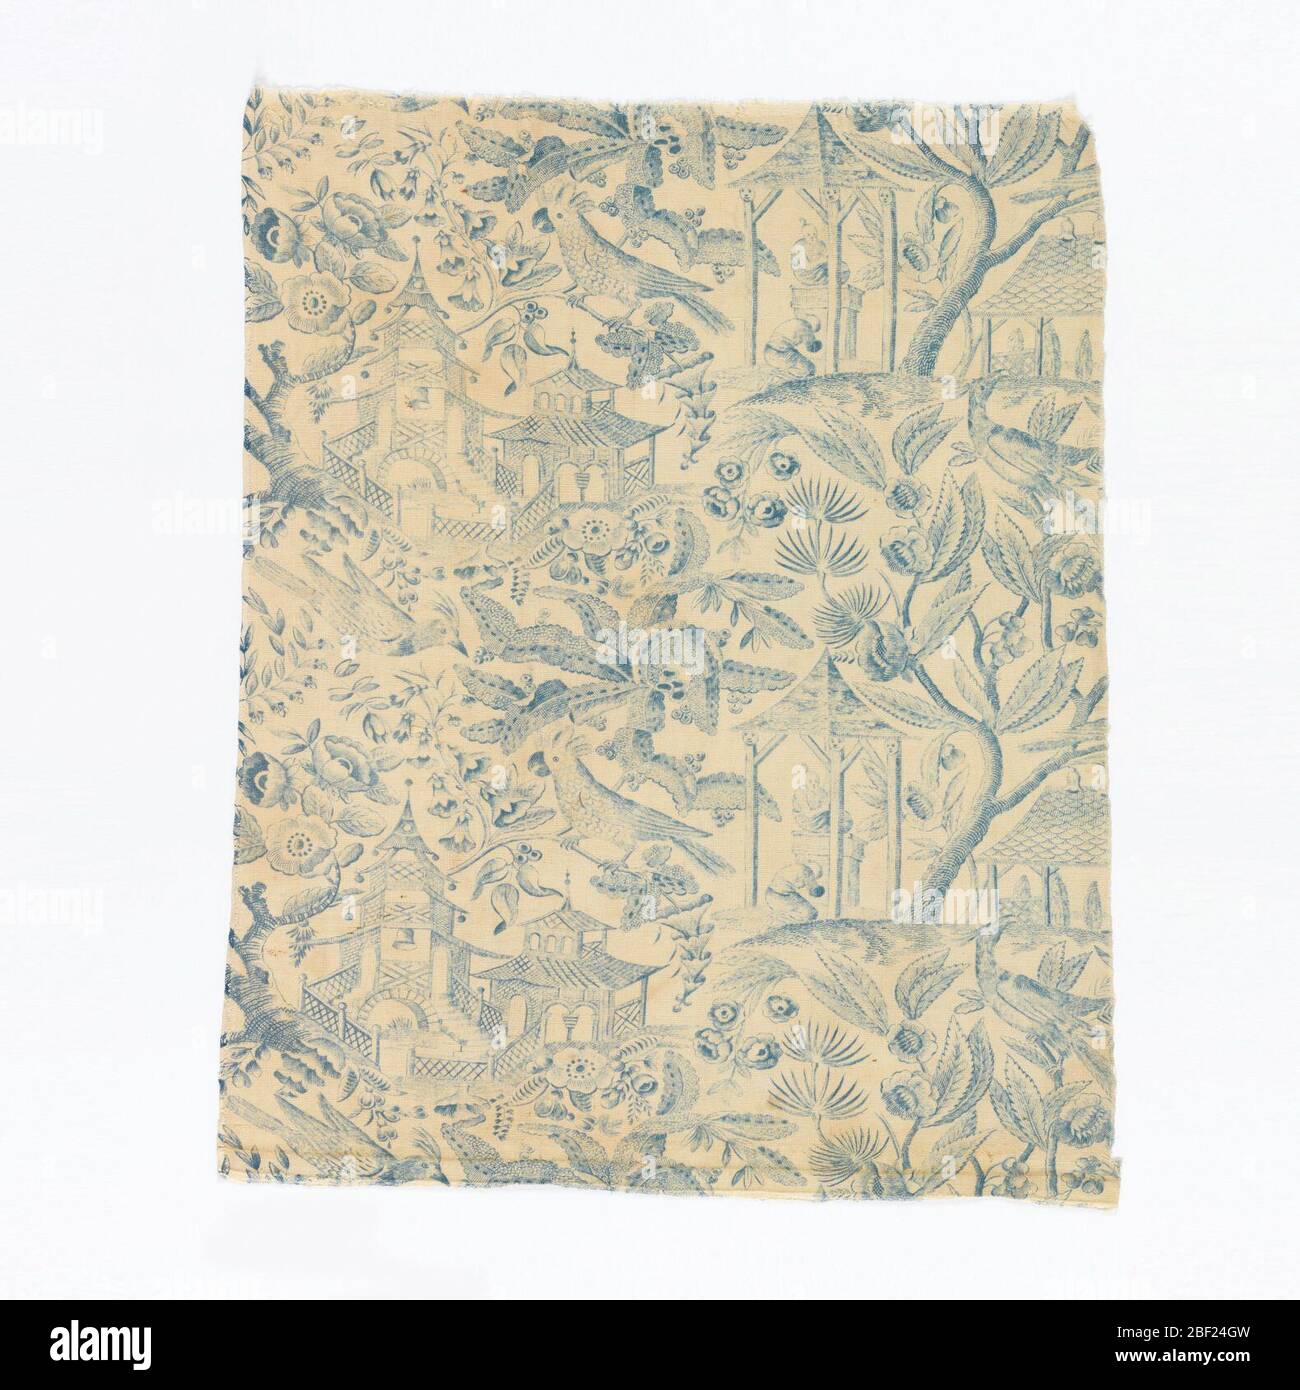 Textile. Pattern of chinoiserie type; with pagodas, male figures, and birds amid foliage. At top piece is gathered into band and fitted with tapes, possibly for a valance. Stock Photo